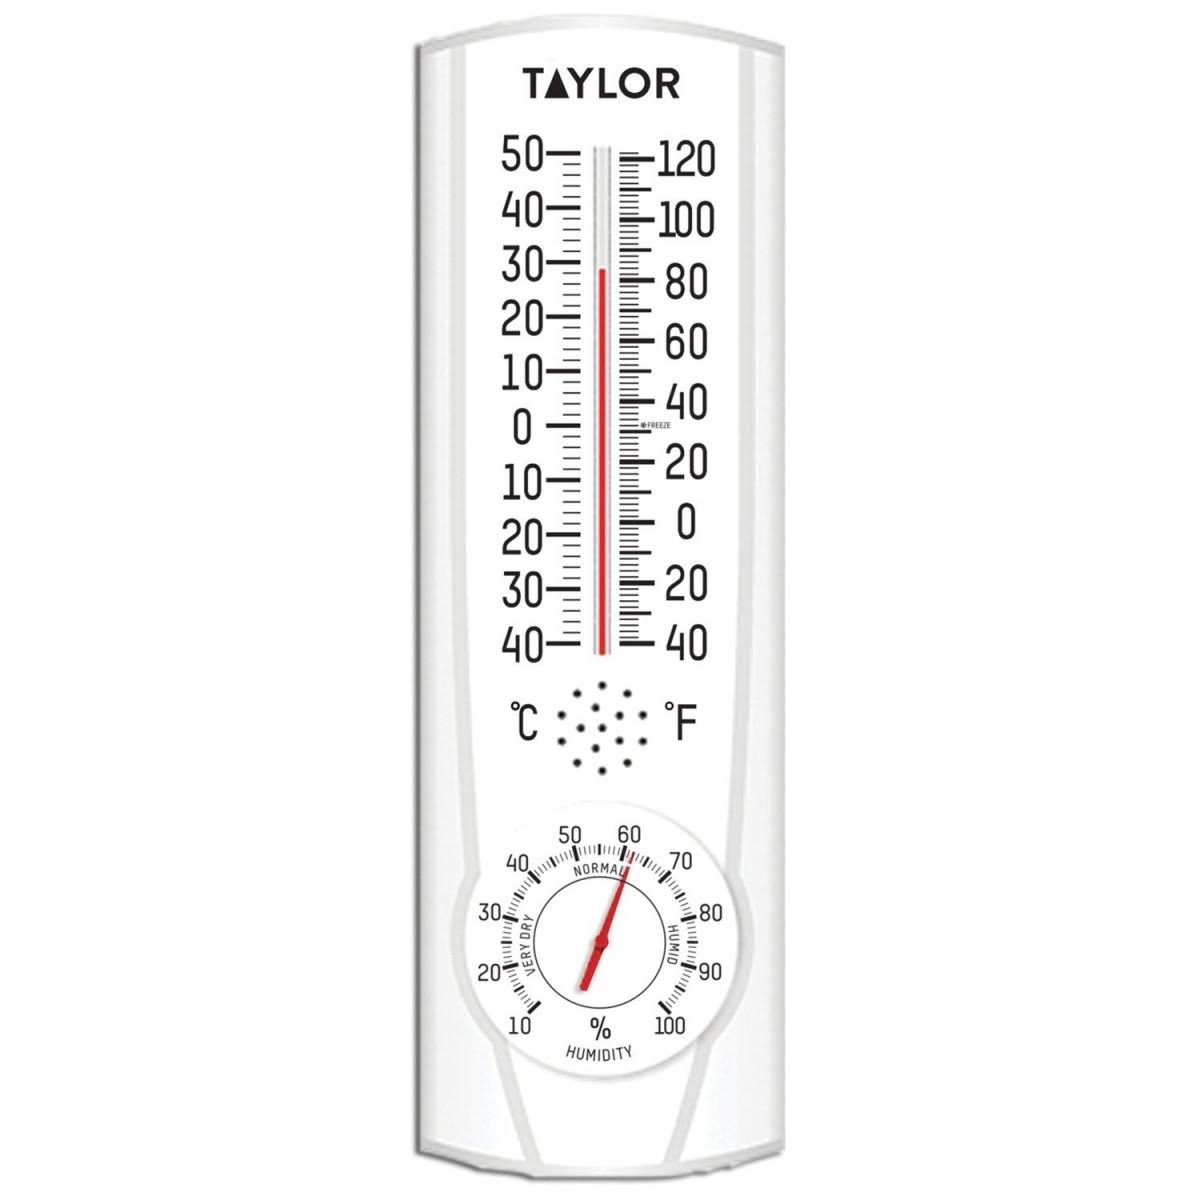 Taylor 5537 Indoor/Outdoor Thermometer - With Hygrometer, 9.125"